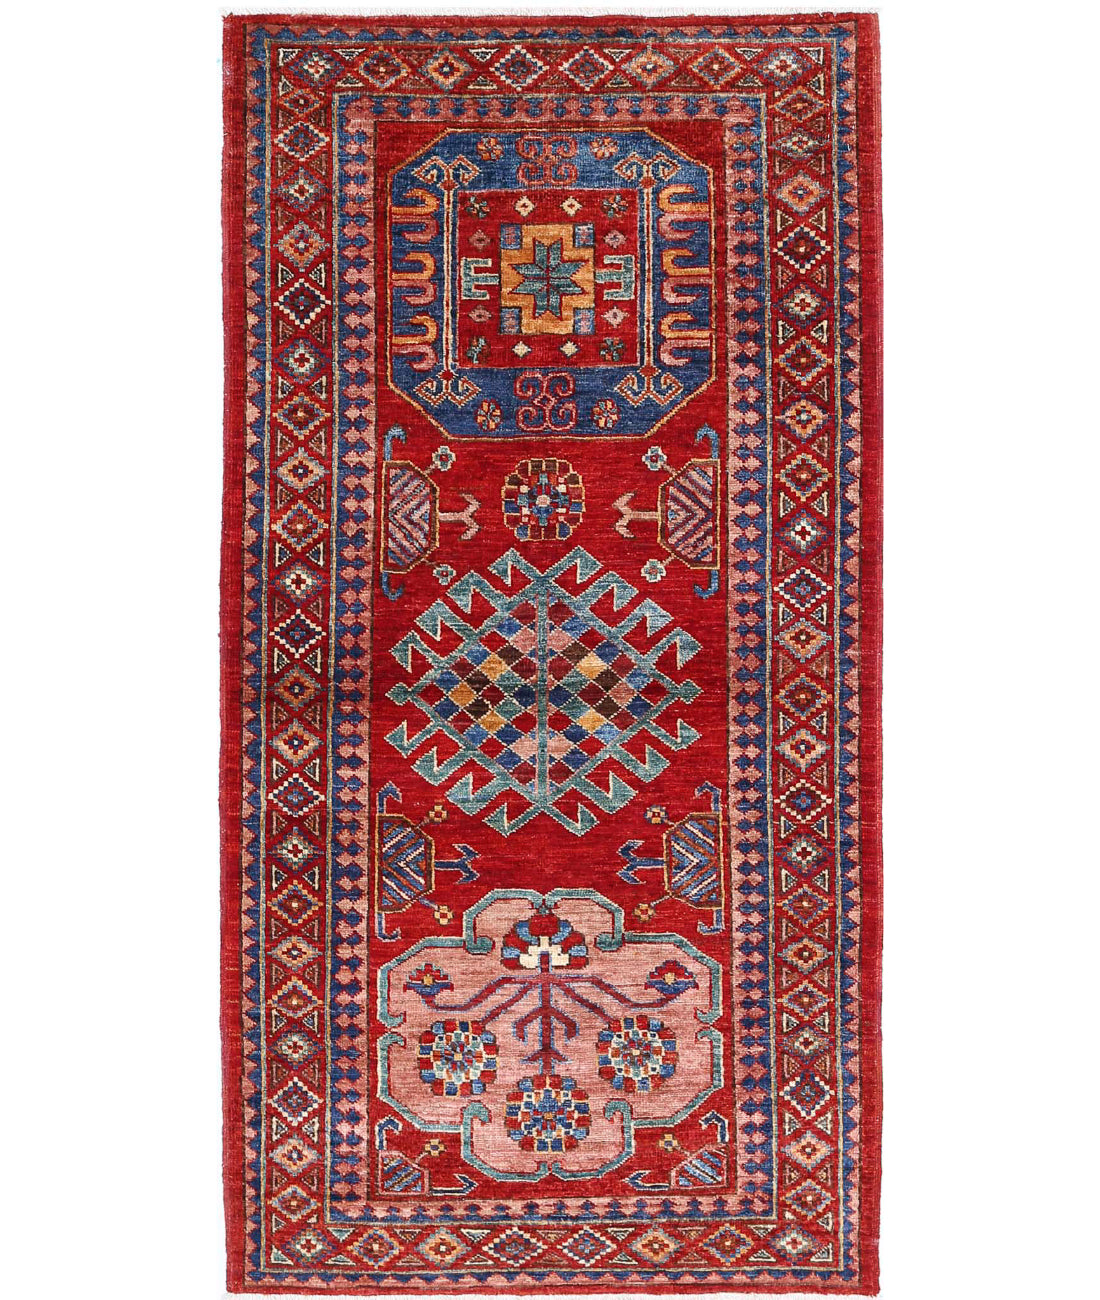 Hand Knotted Nomadic Caucasian Humna Wool Rug - 2&#39;10&#39;&#39; x 5&#39;10&#39;&#39; 2&#39;10&#39;&#39; x 5&#39;10&#39;&#39; (85 X 175) / Red / Blue